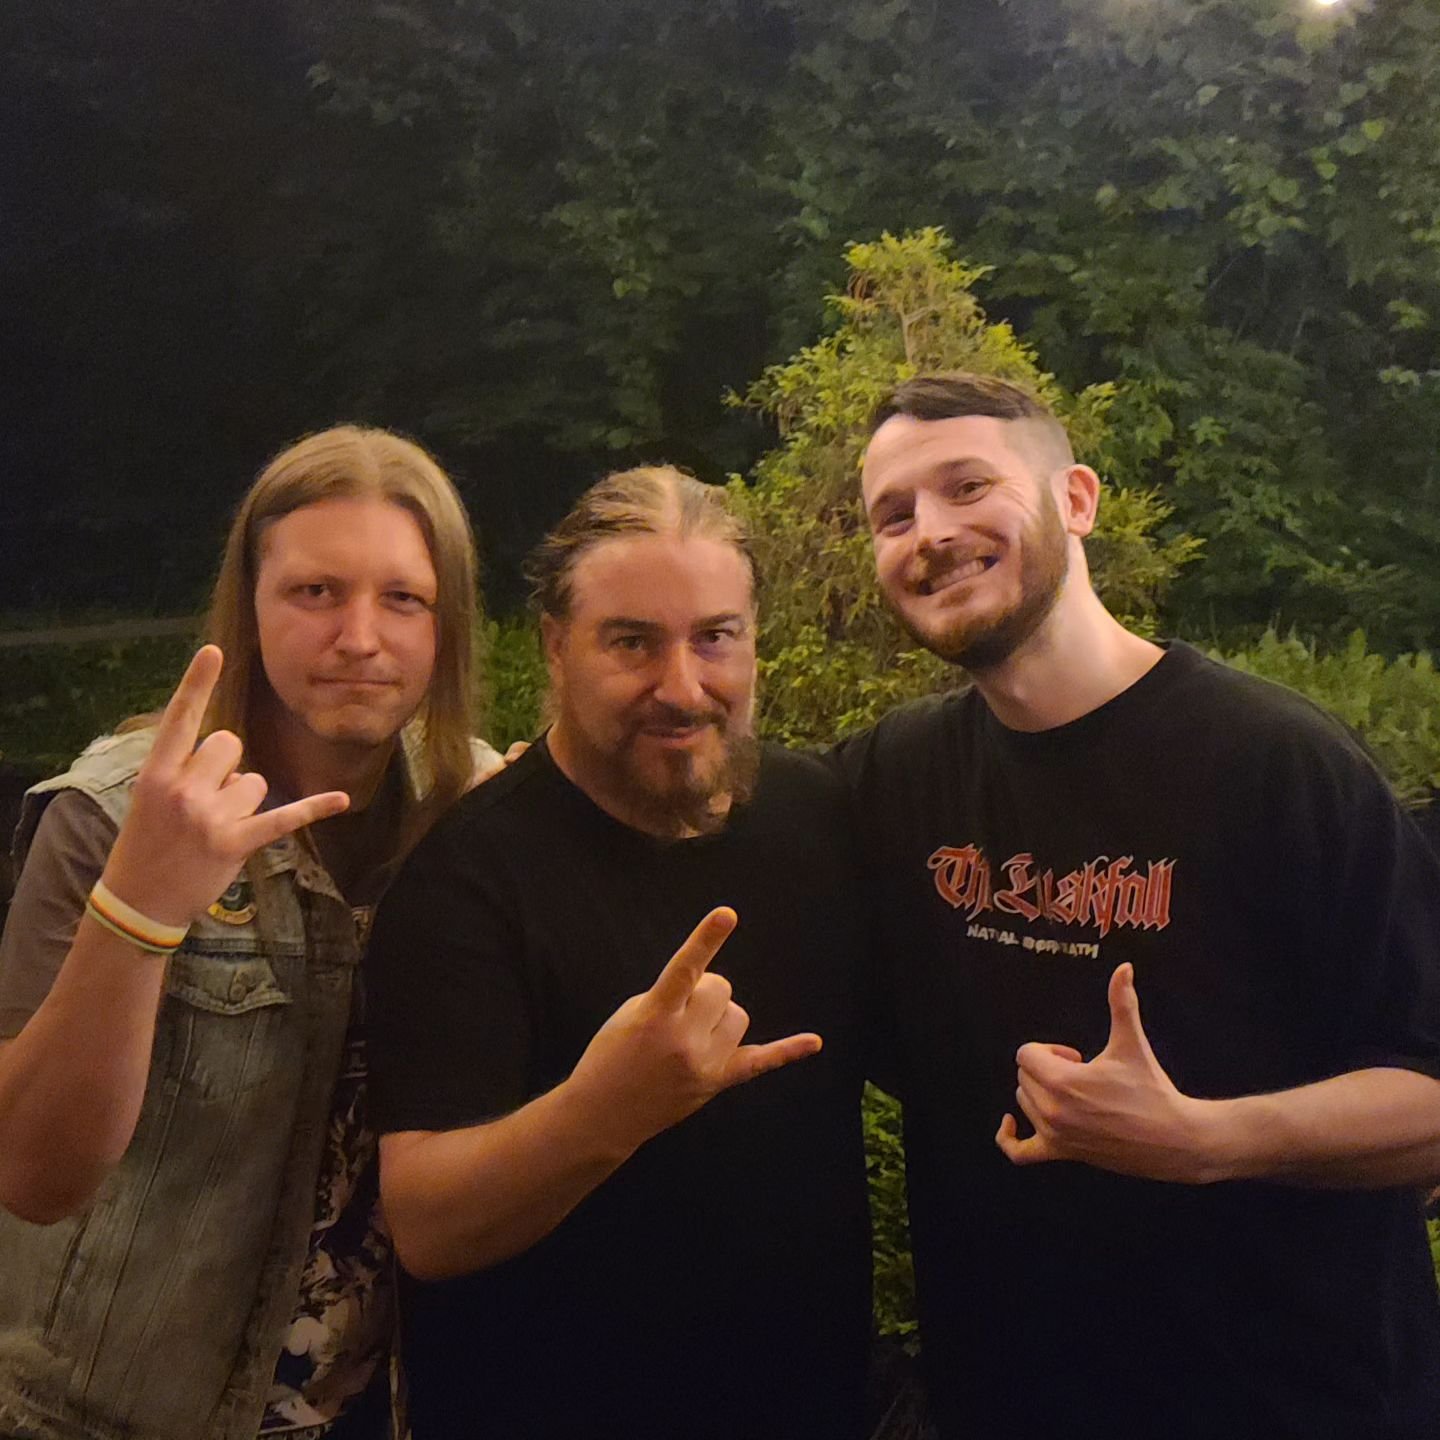 Caught up with the legend JF Dagenais after the Kataklysm show tonight! We are working on our second studio album with him at @jfdstudio_ as we speak! Can't wait to share &quot;Art of Survival&quot; with you all: it is gonna blow you away! 🤘
🔄
#met